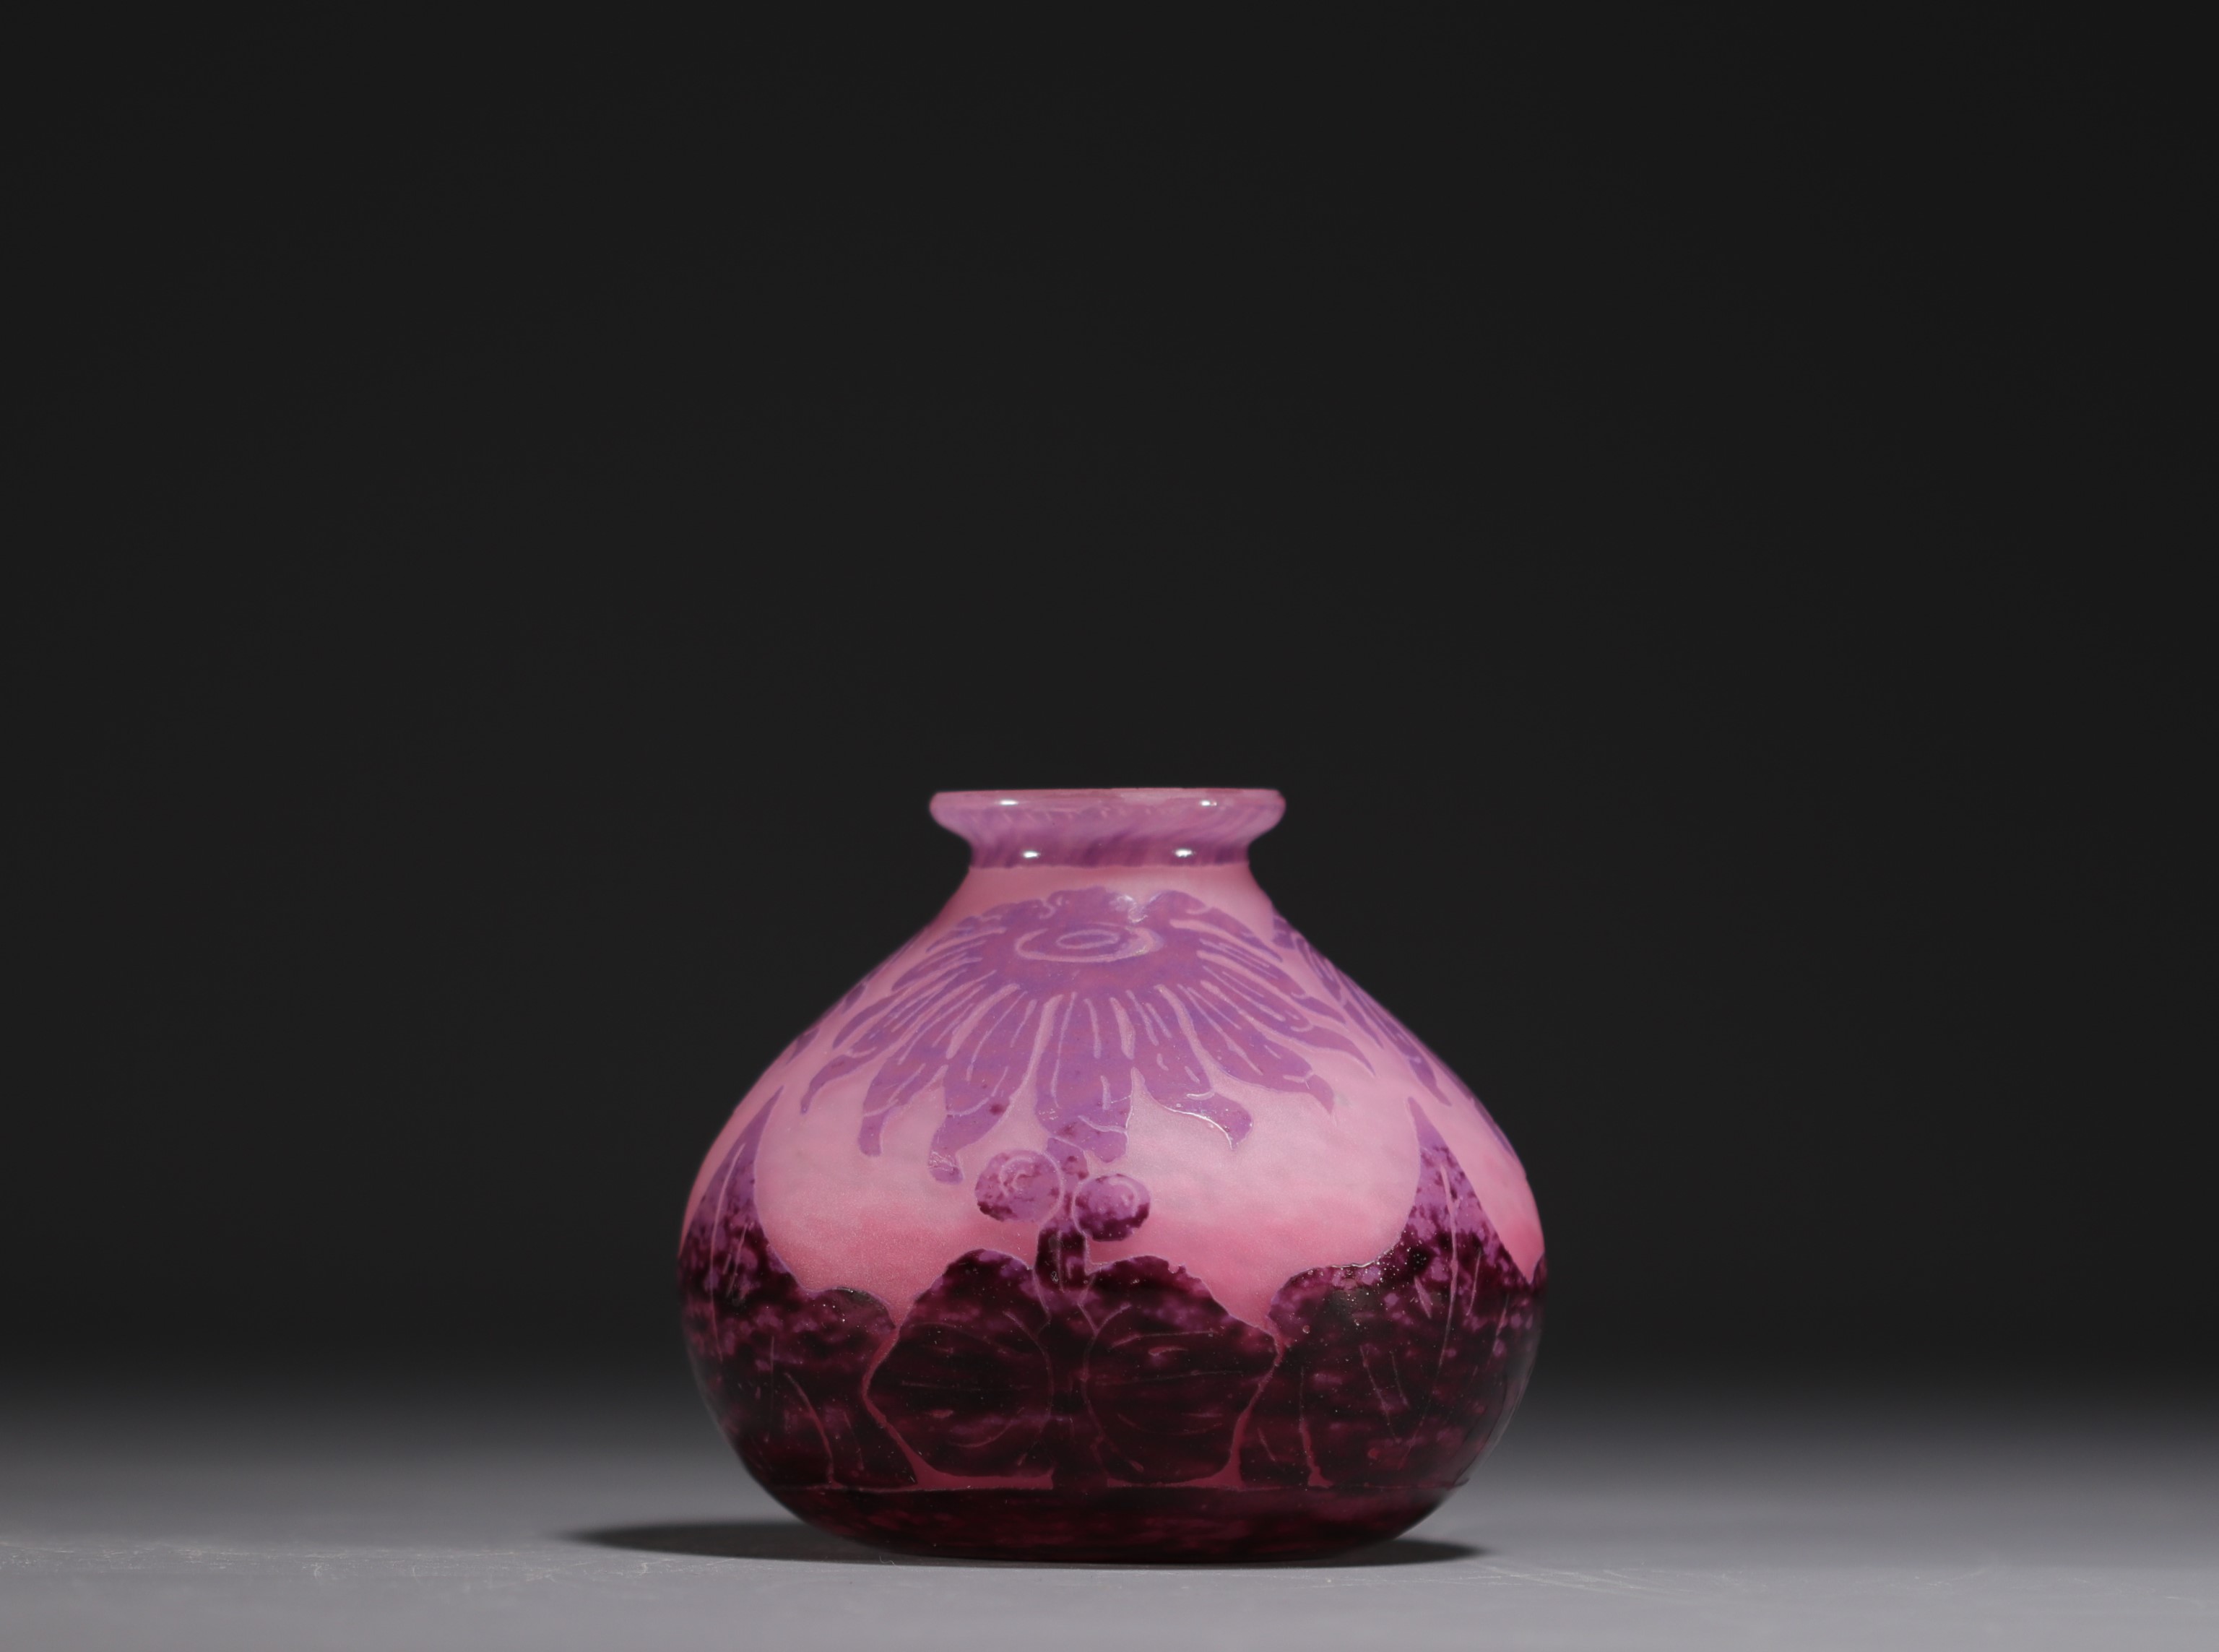 Le Verre Francais - Acid-etched multi-layered glass vase decorated with dahlias, signed. - Image 2 of 4